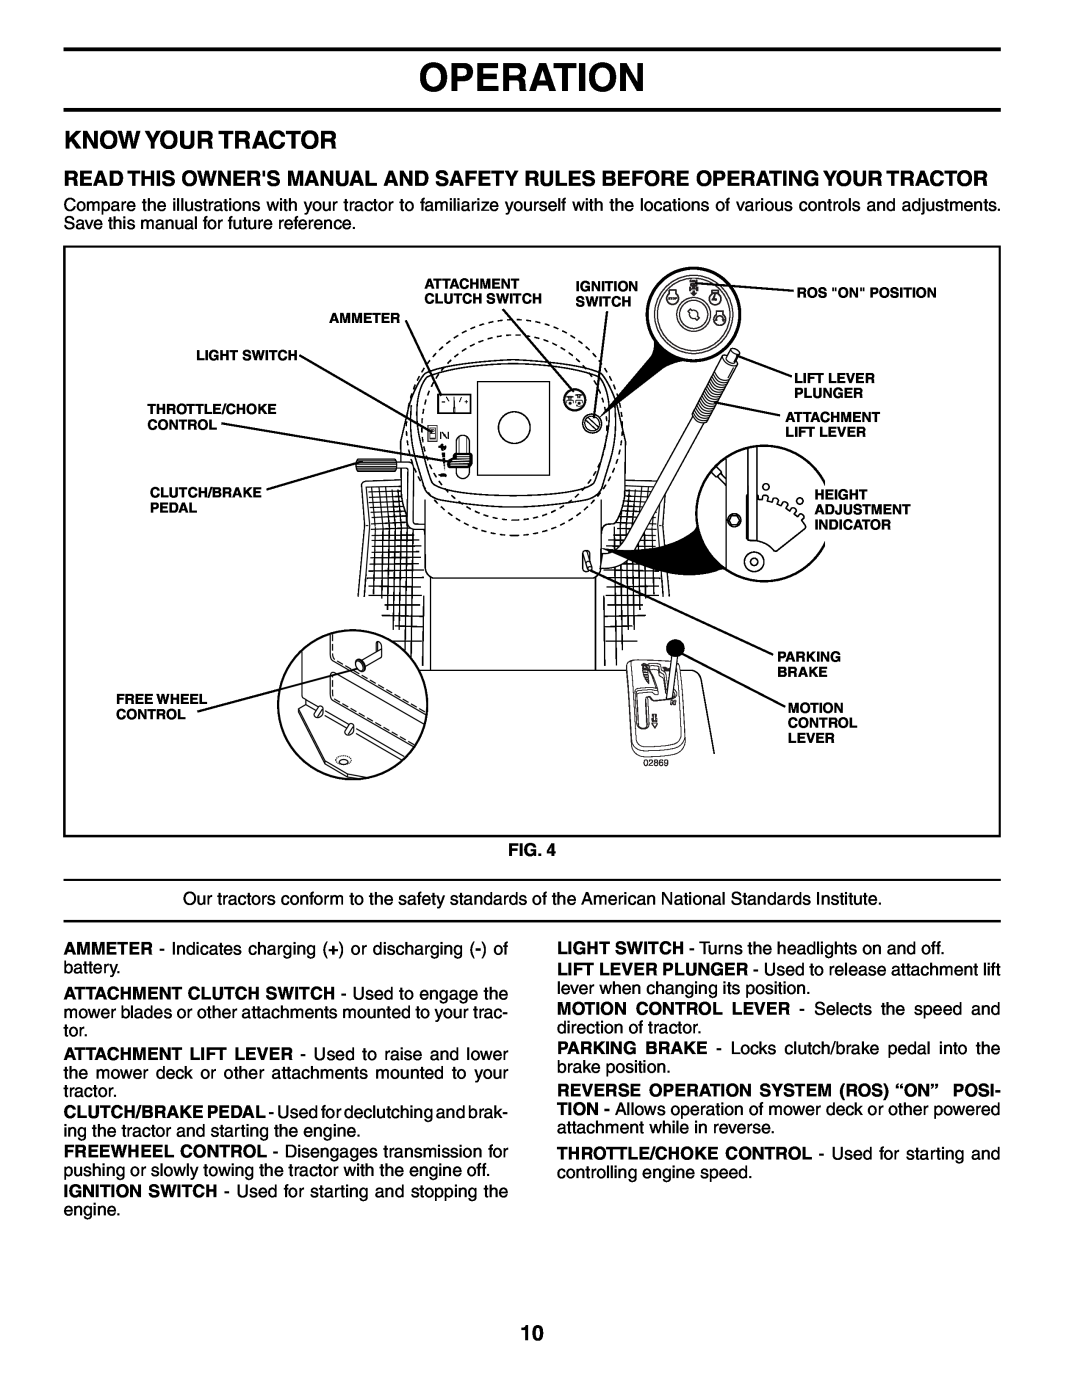 Husqvarna LTH1542 owner manual Know Your Tractor, Operation 